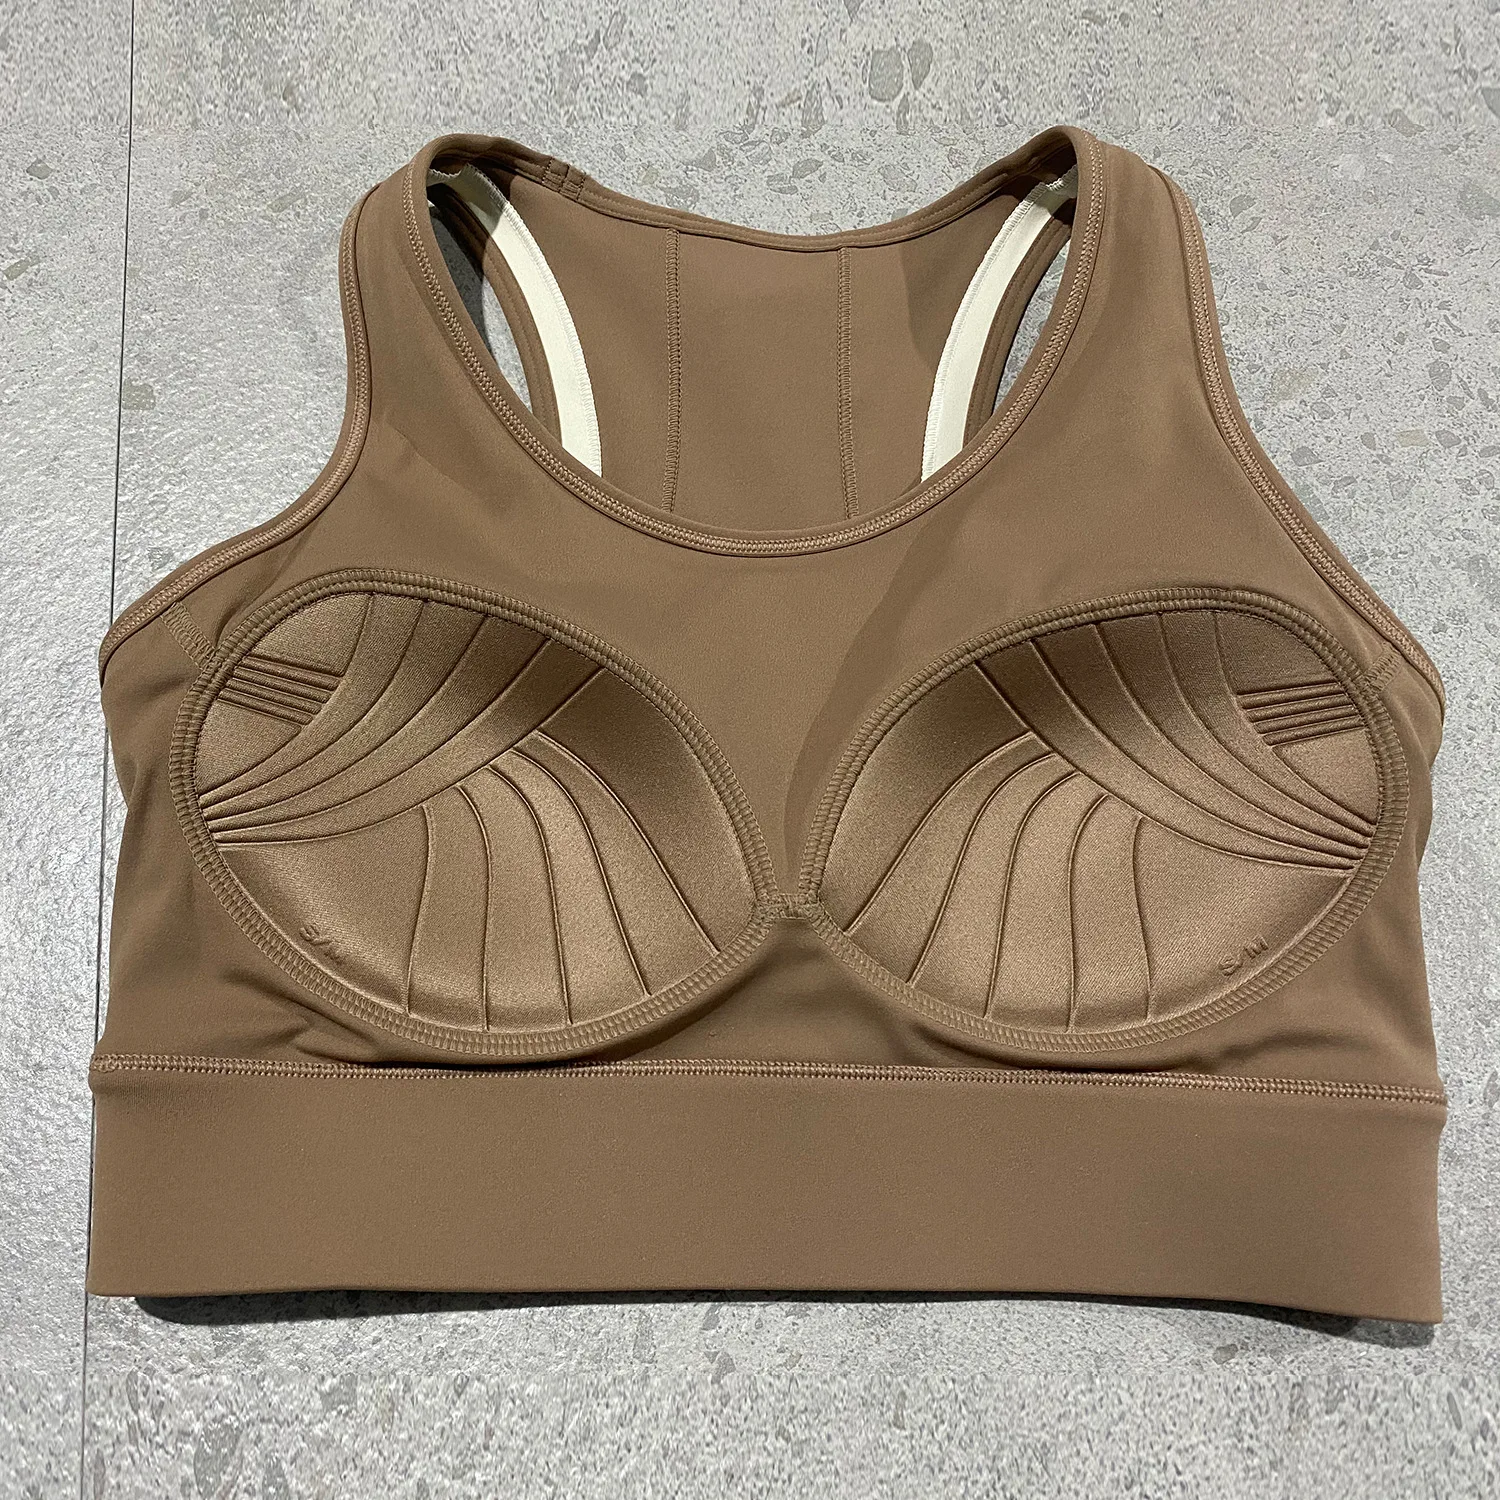 Wholesale New Design Two Tone Colors High Impact Yoga Bra Shockproof Un-removable Padded Workout Tops Racer Back Sports Bra